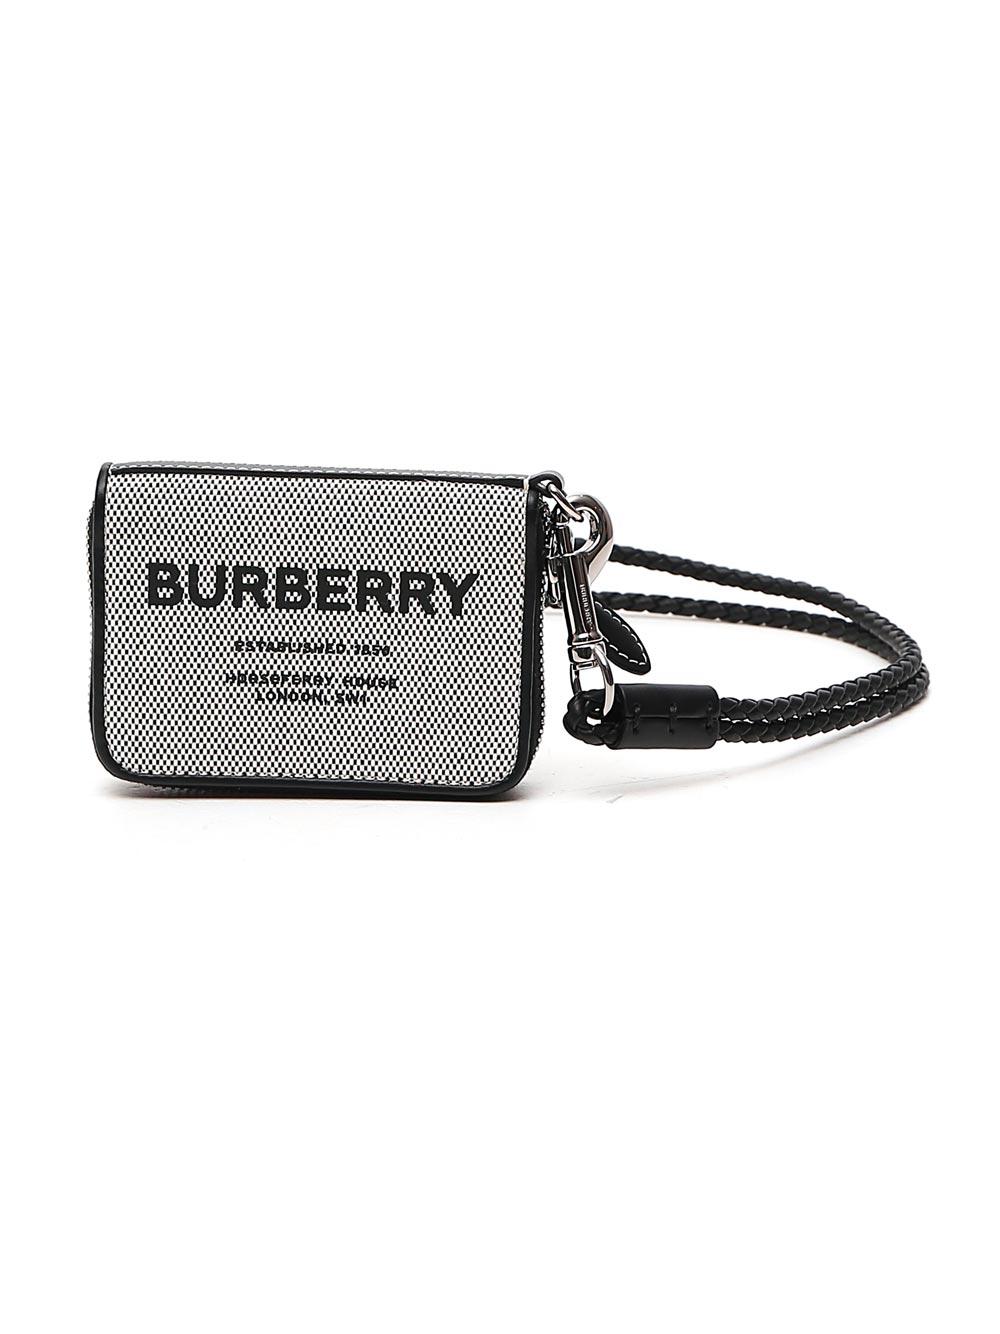 NWT Burberry Men's Chase Embossed Leather Card Case Holder -Dark